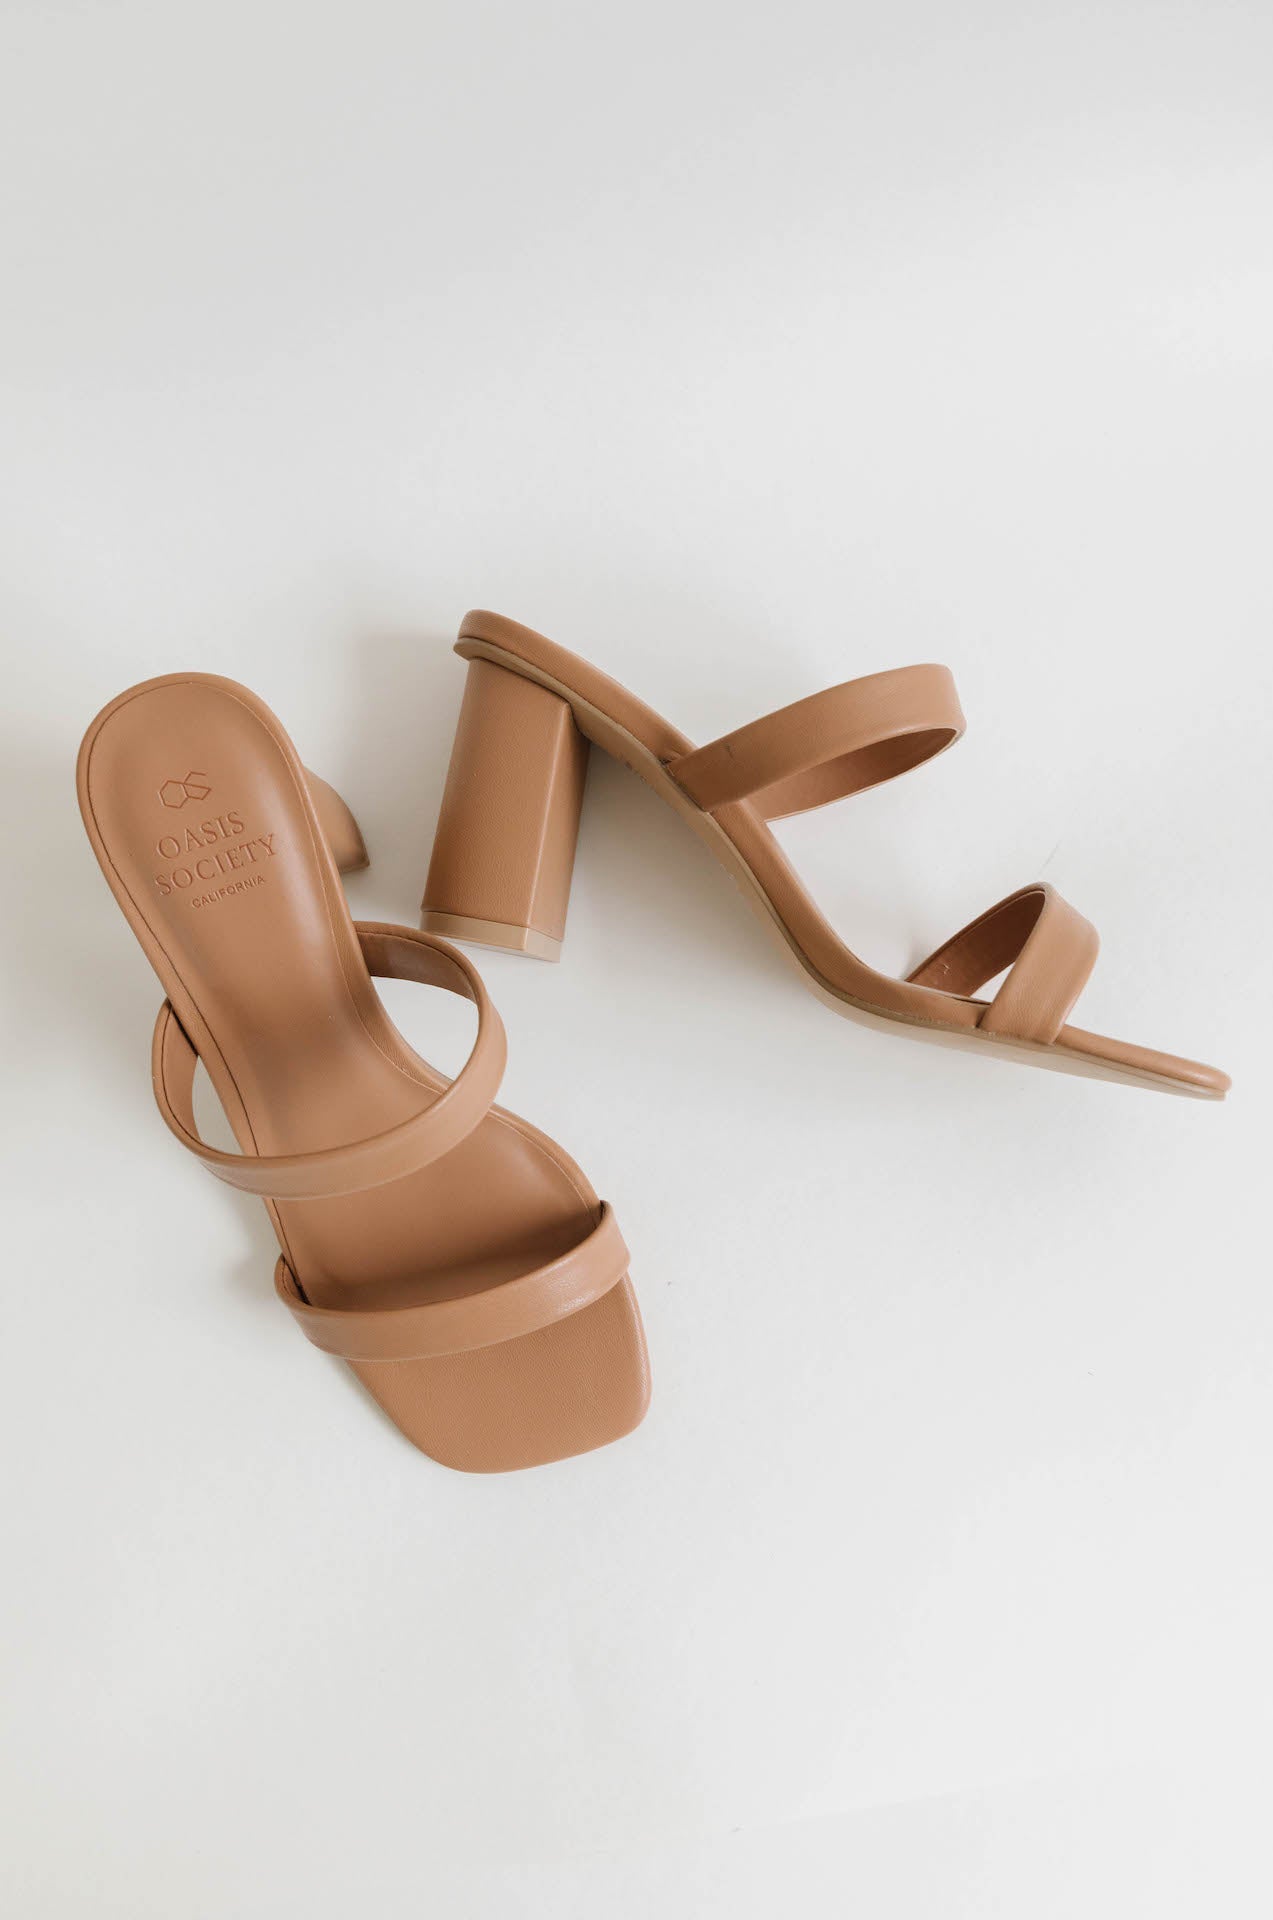 nude beige tan strappy faux leather heels with a chunky block heel